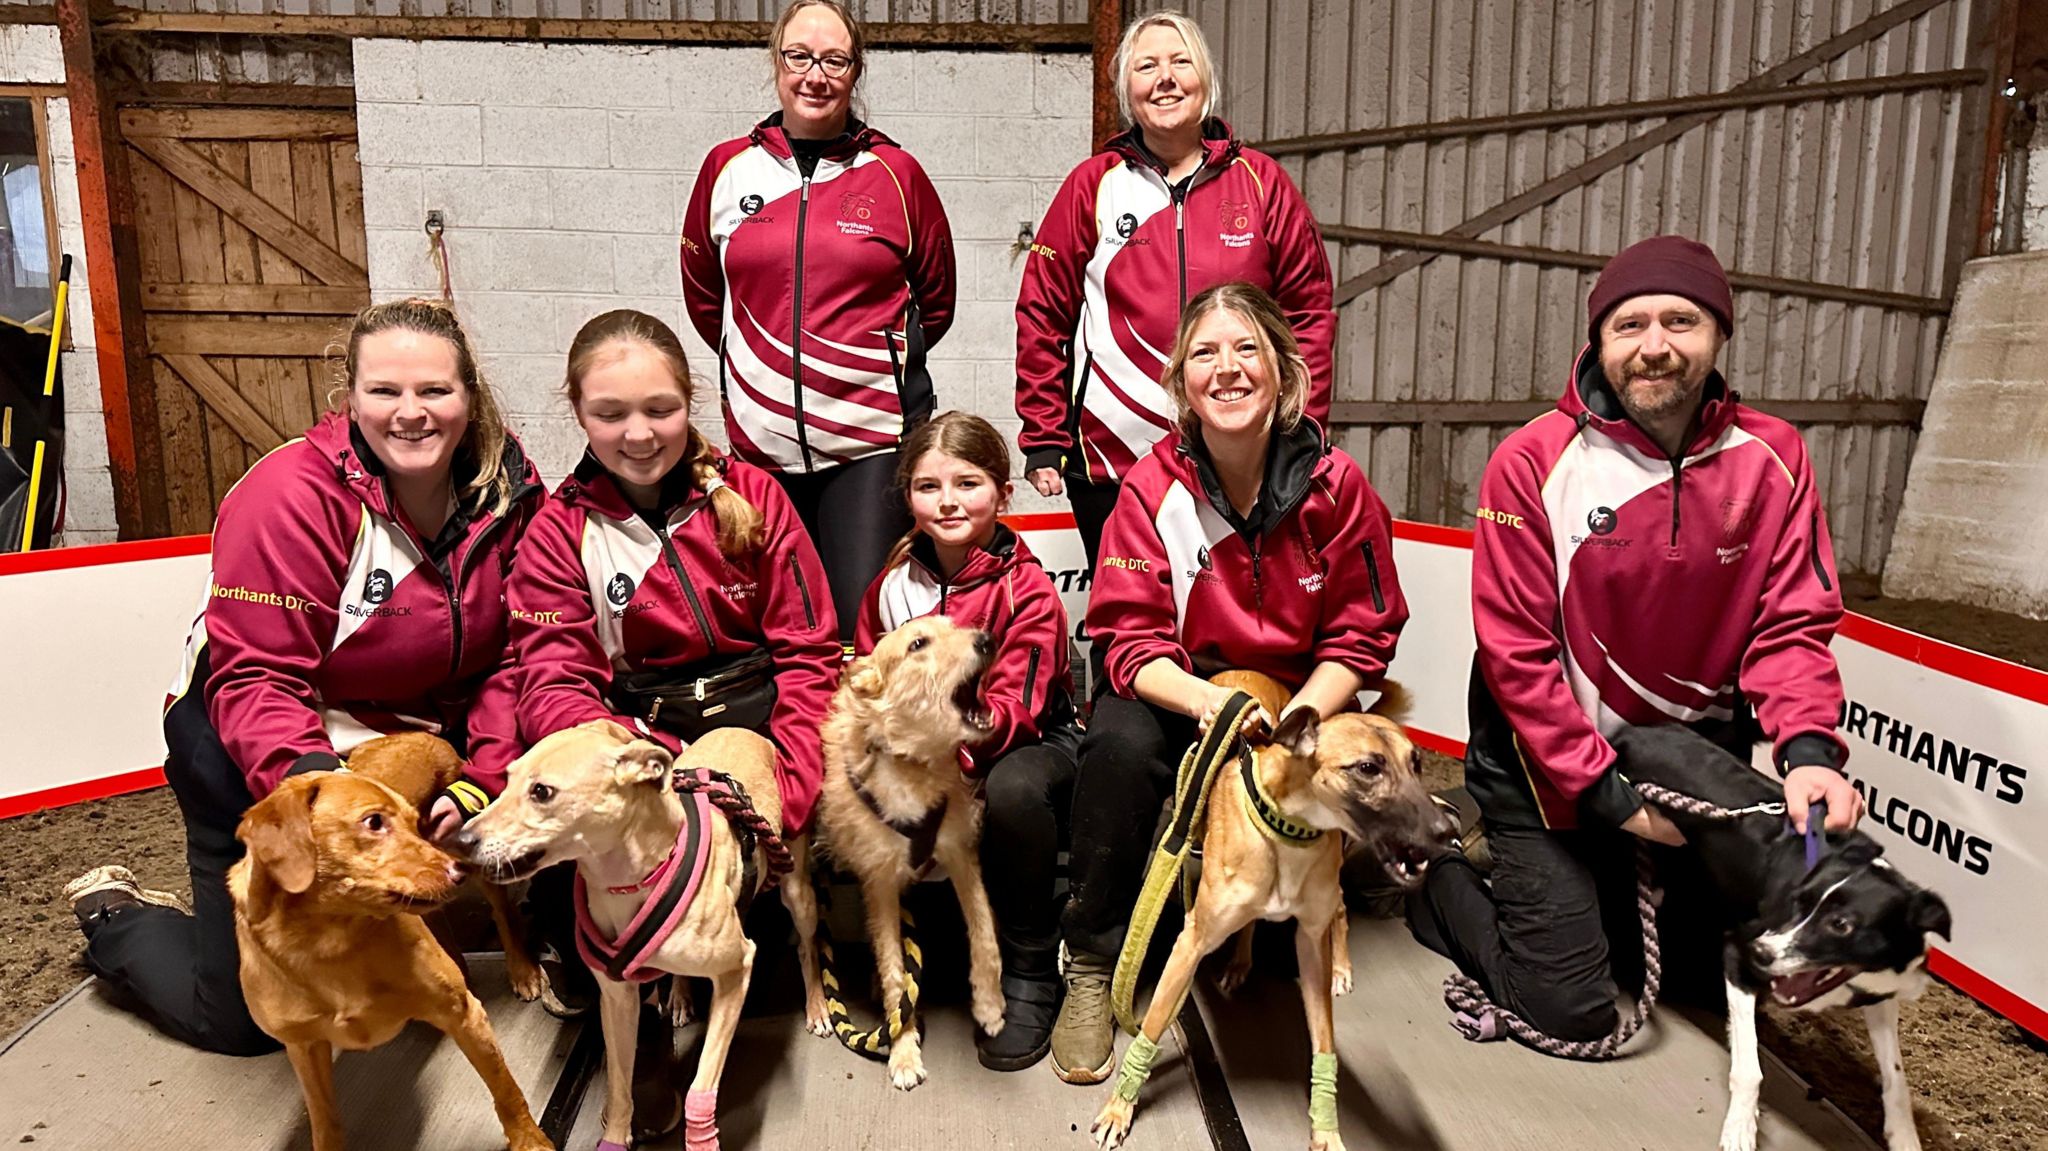 The six person flyball team with their dogs - five cross breed and one pure breed